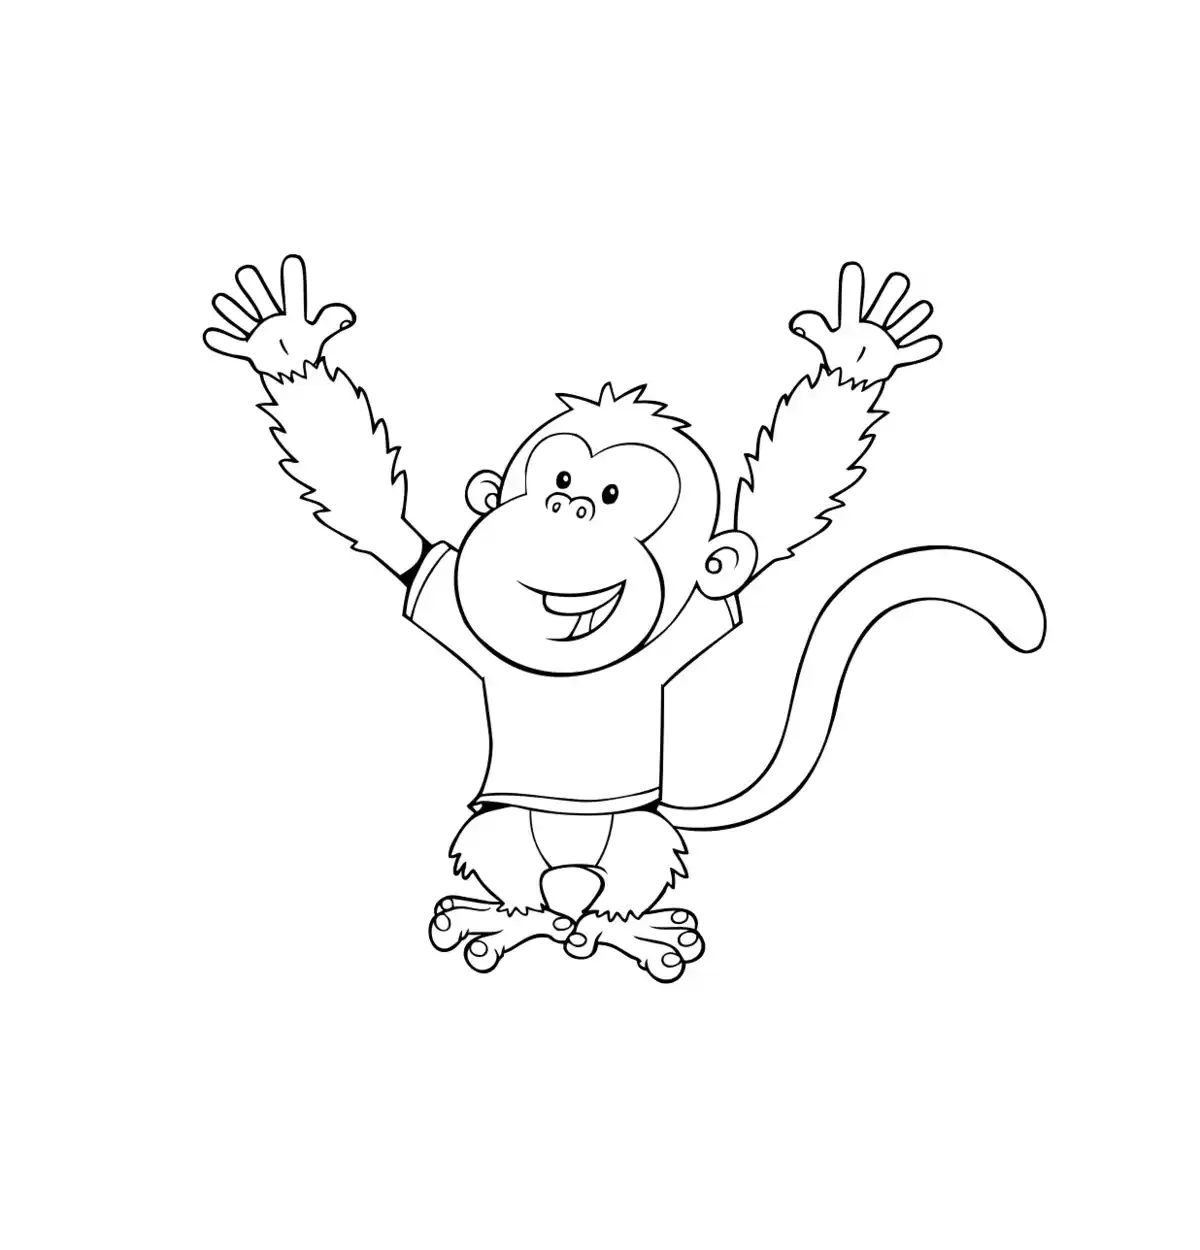 Free Coloring Pages PDF, Monkey Kids Coloring Pages Pdf